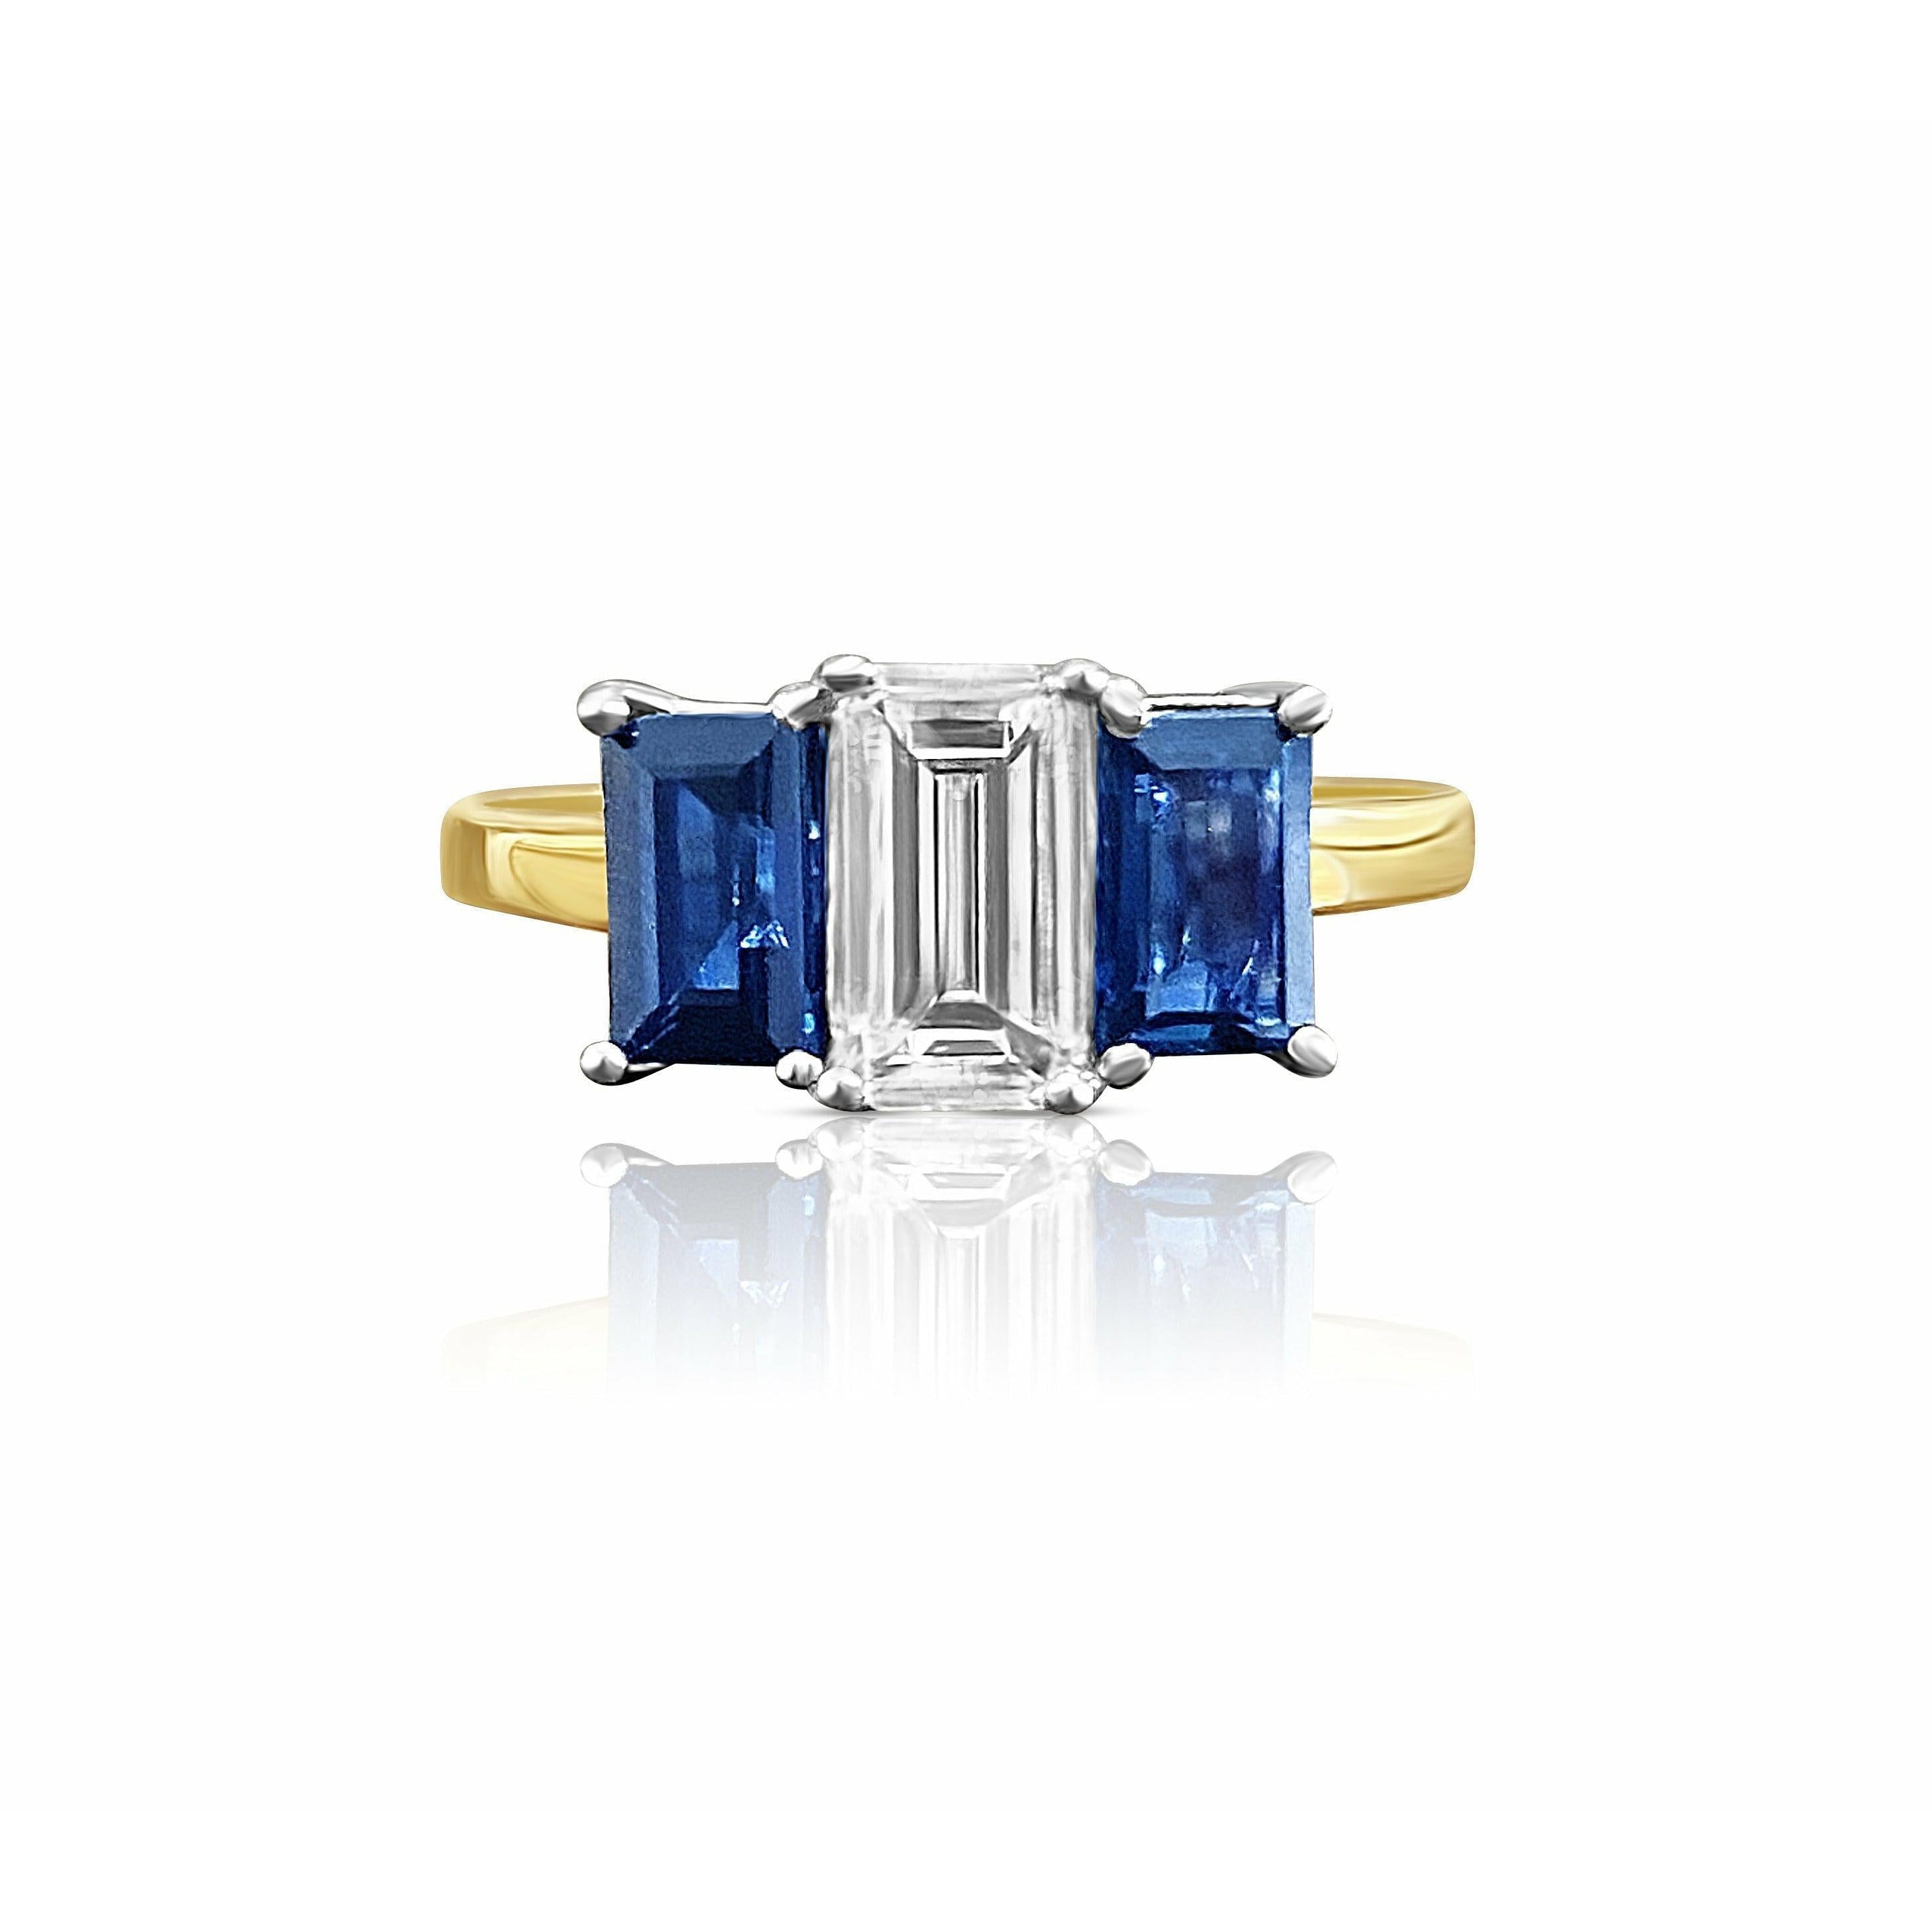 0.92 carat GIA certified Emerald Cut Diamond Engagement ring with Blue Sapphire Sidestone - ASSAY